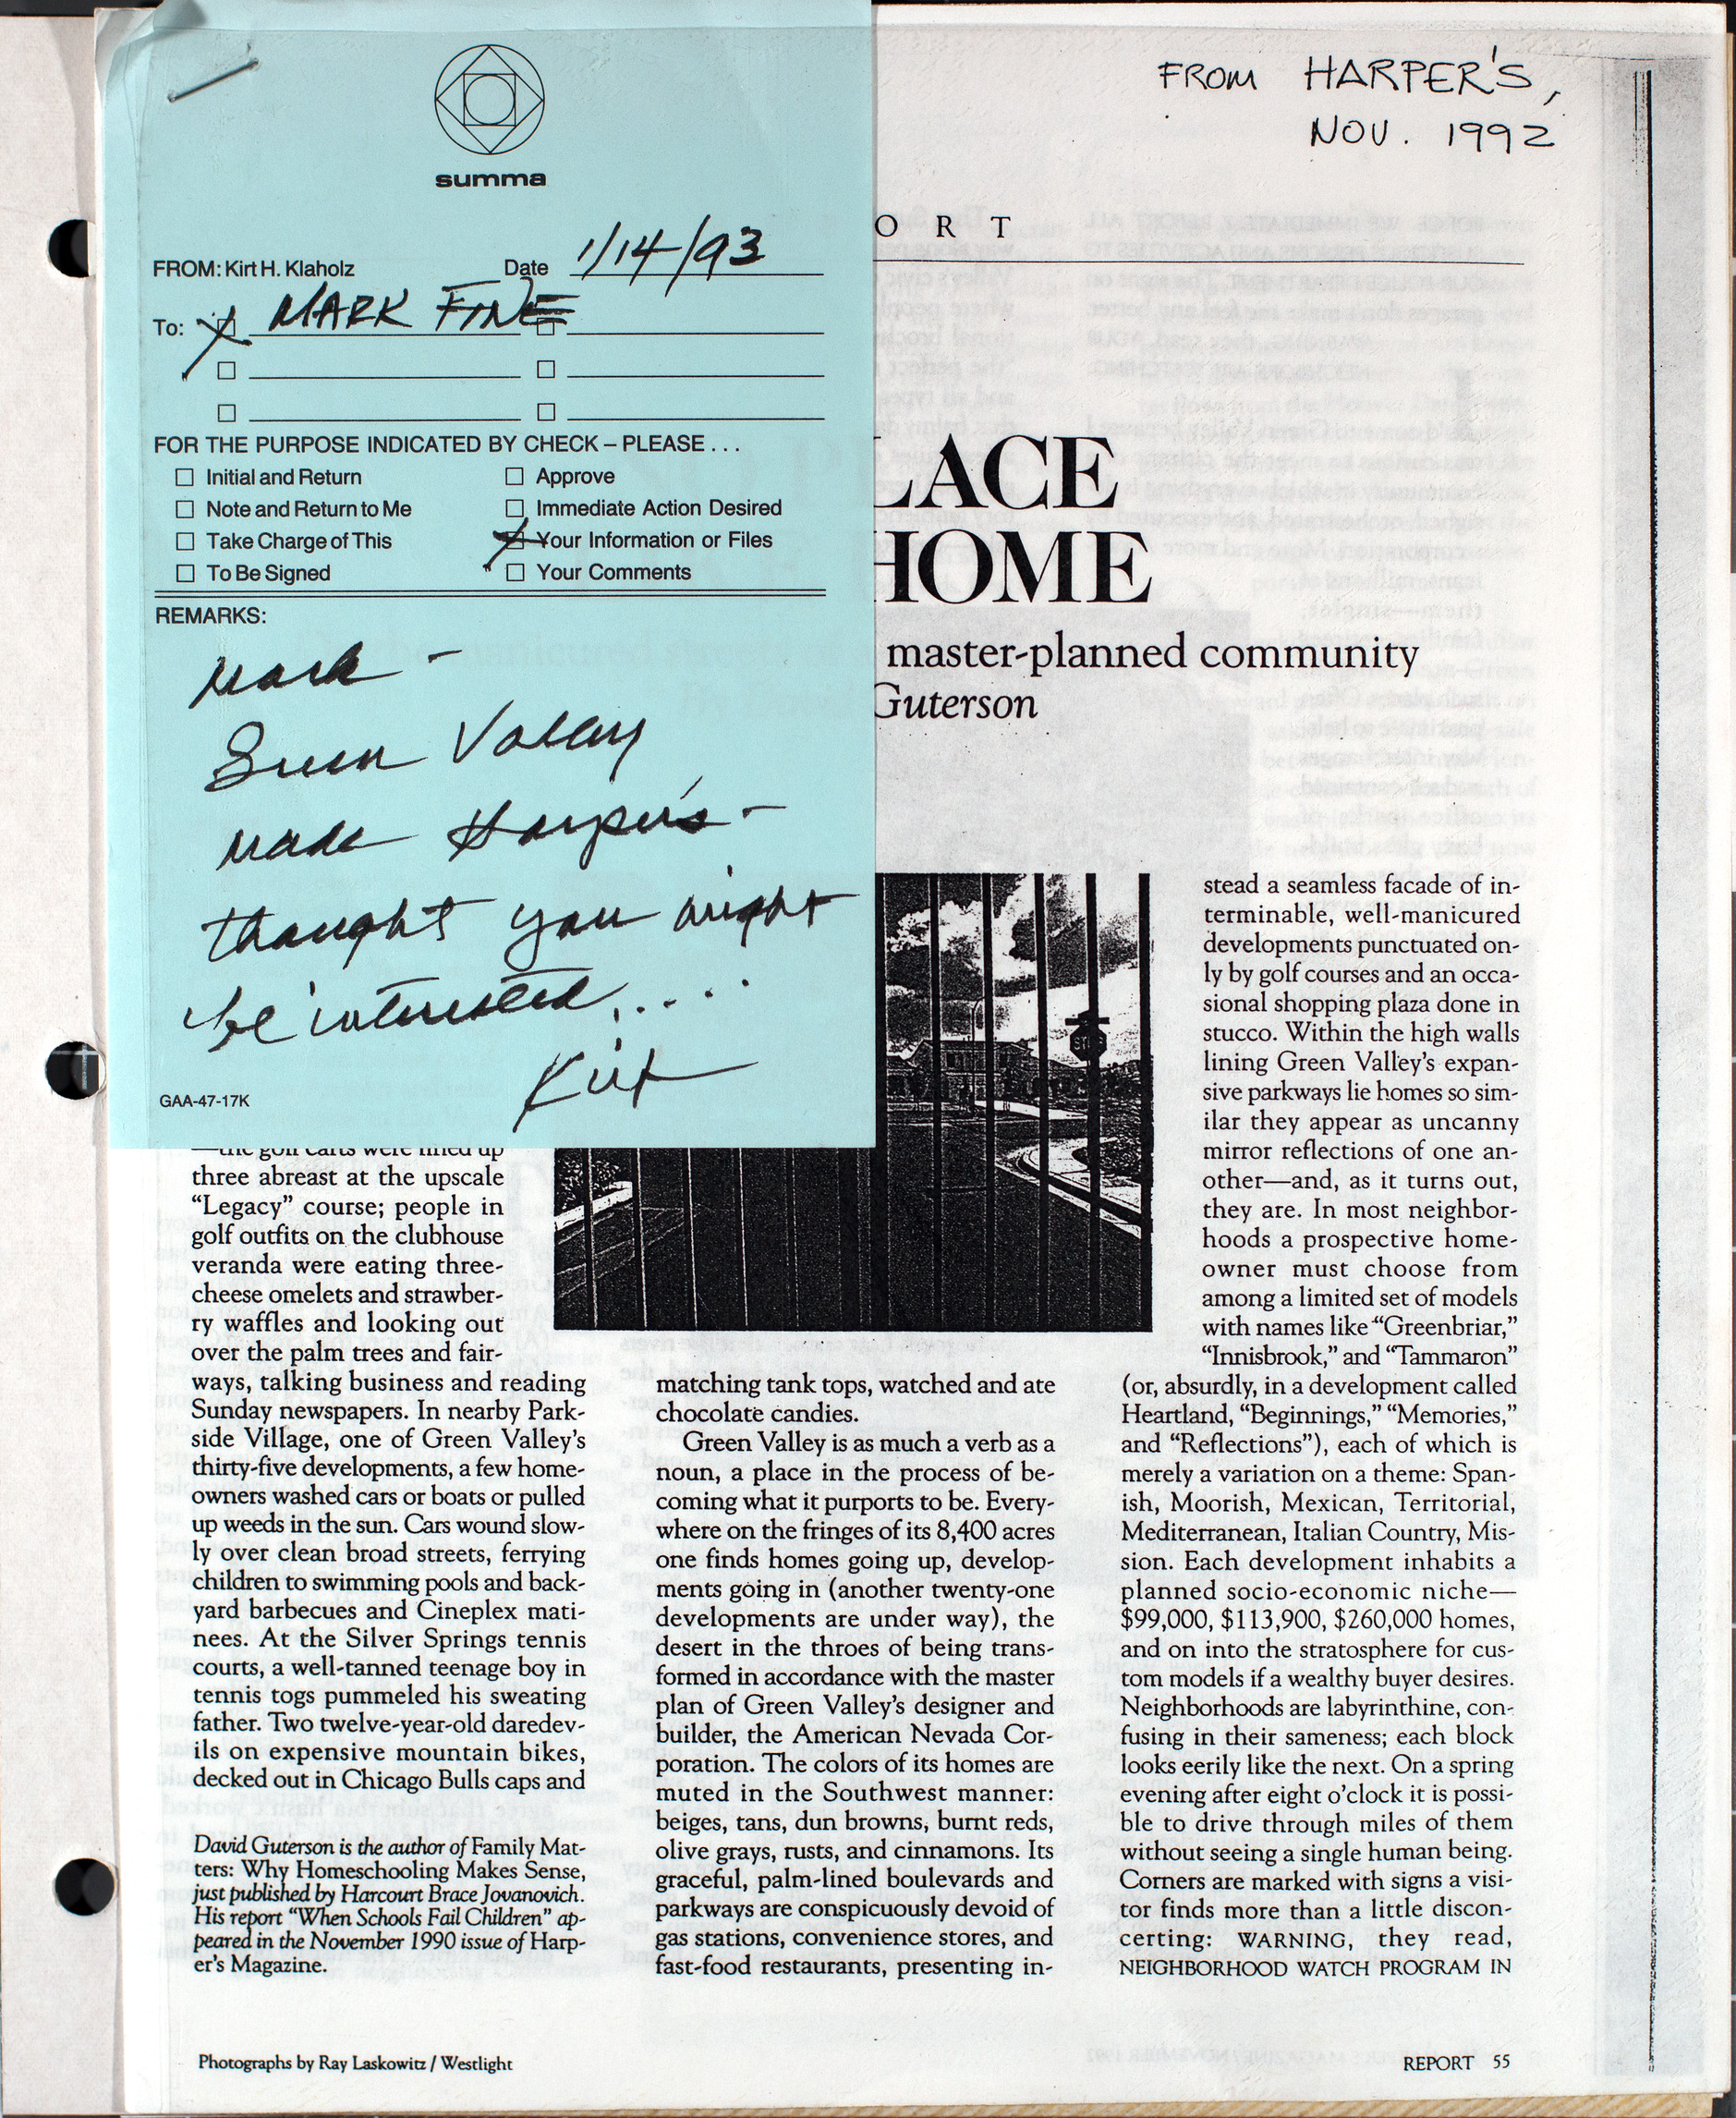 Memo and clipping from Harper's magazine, November 1992